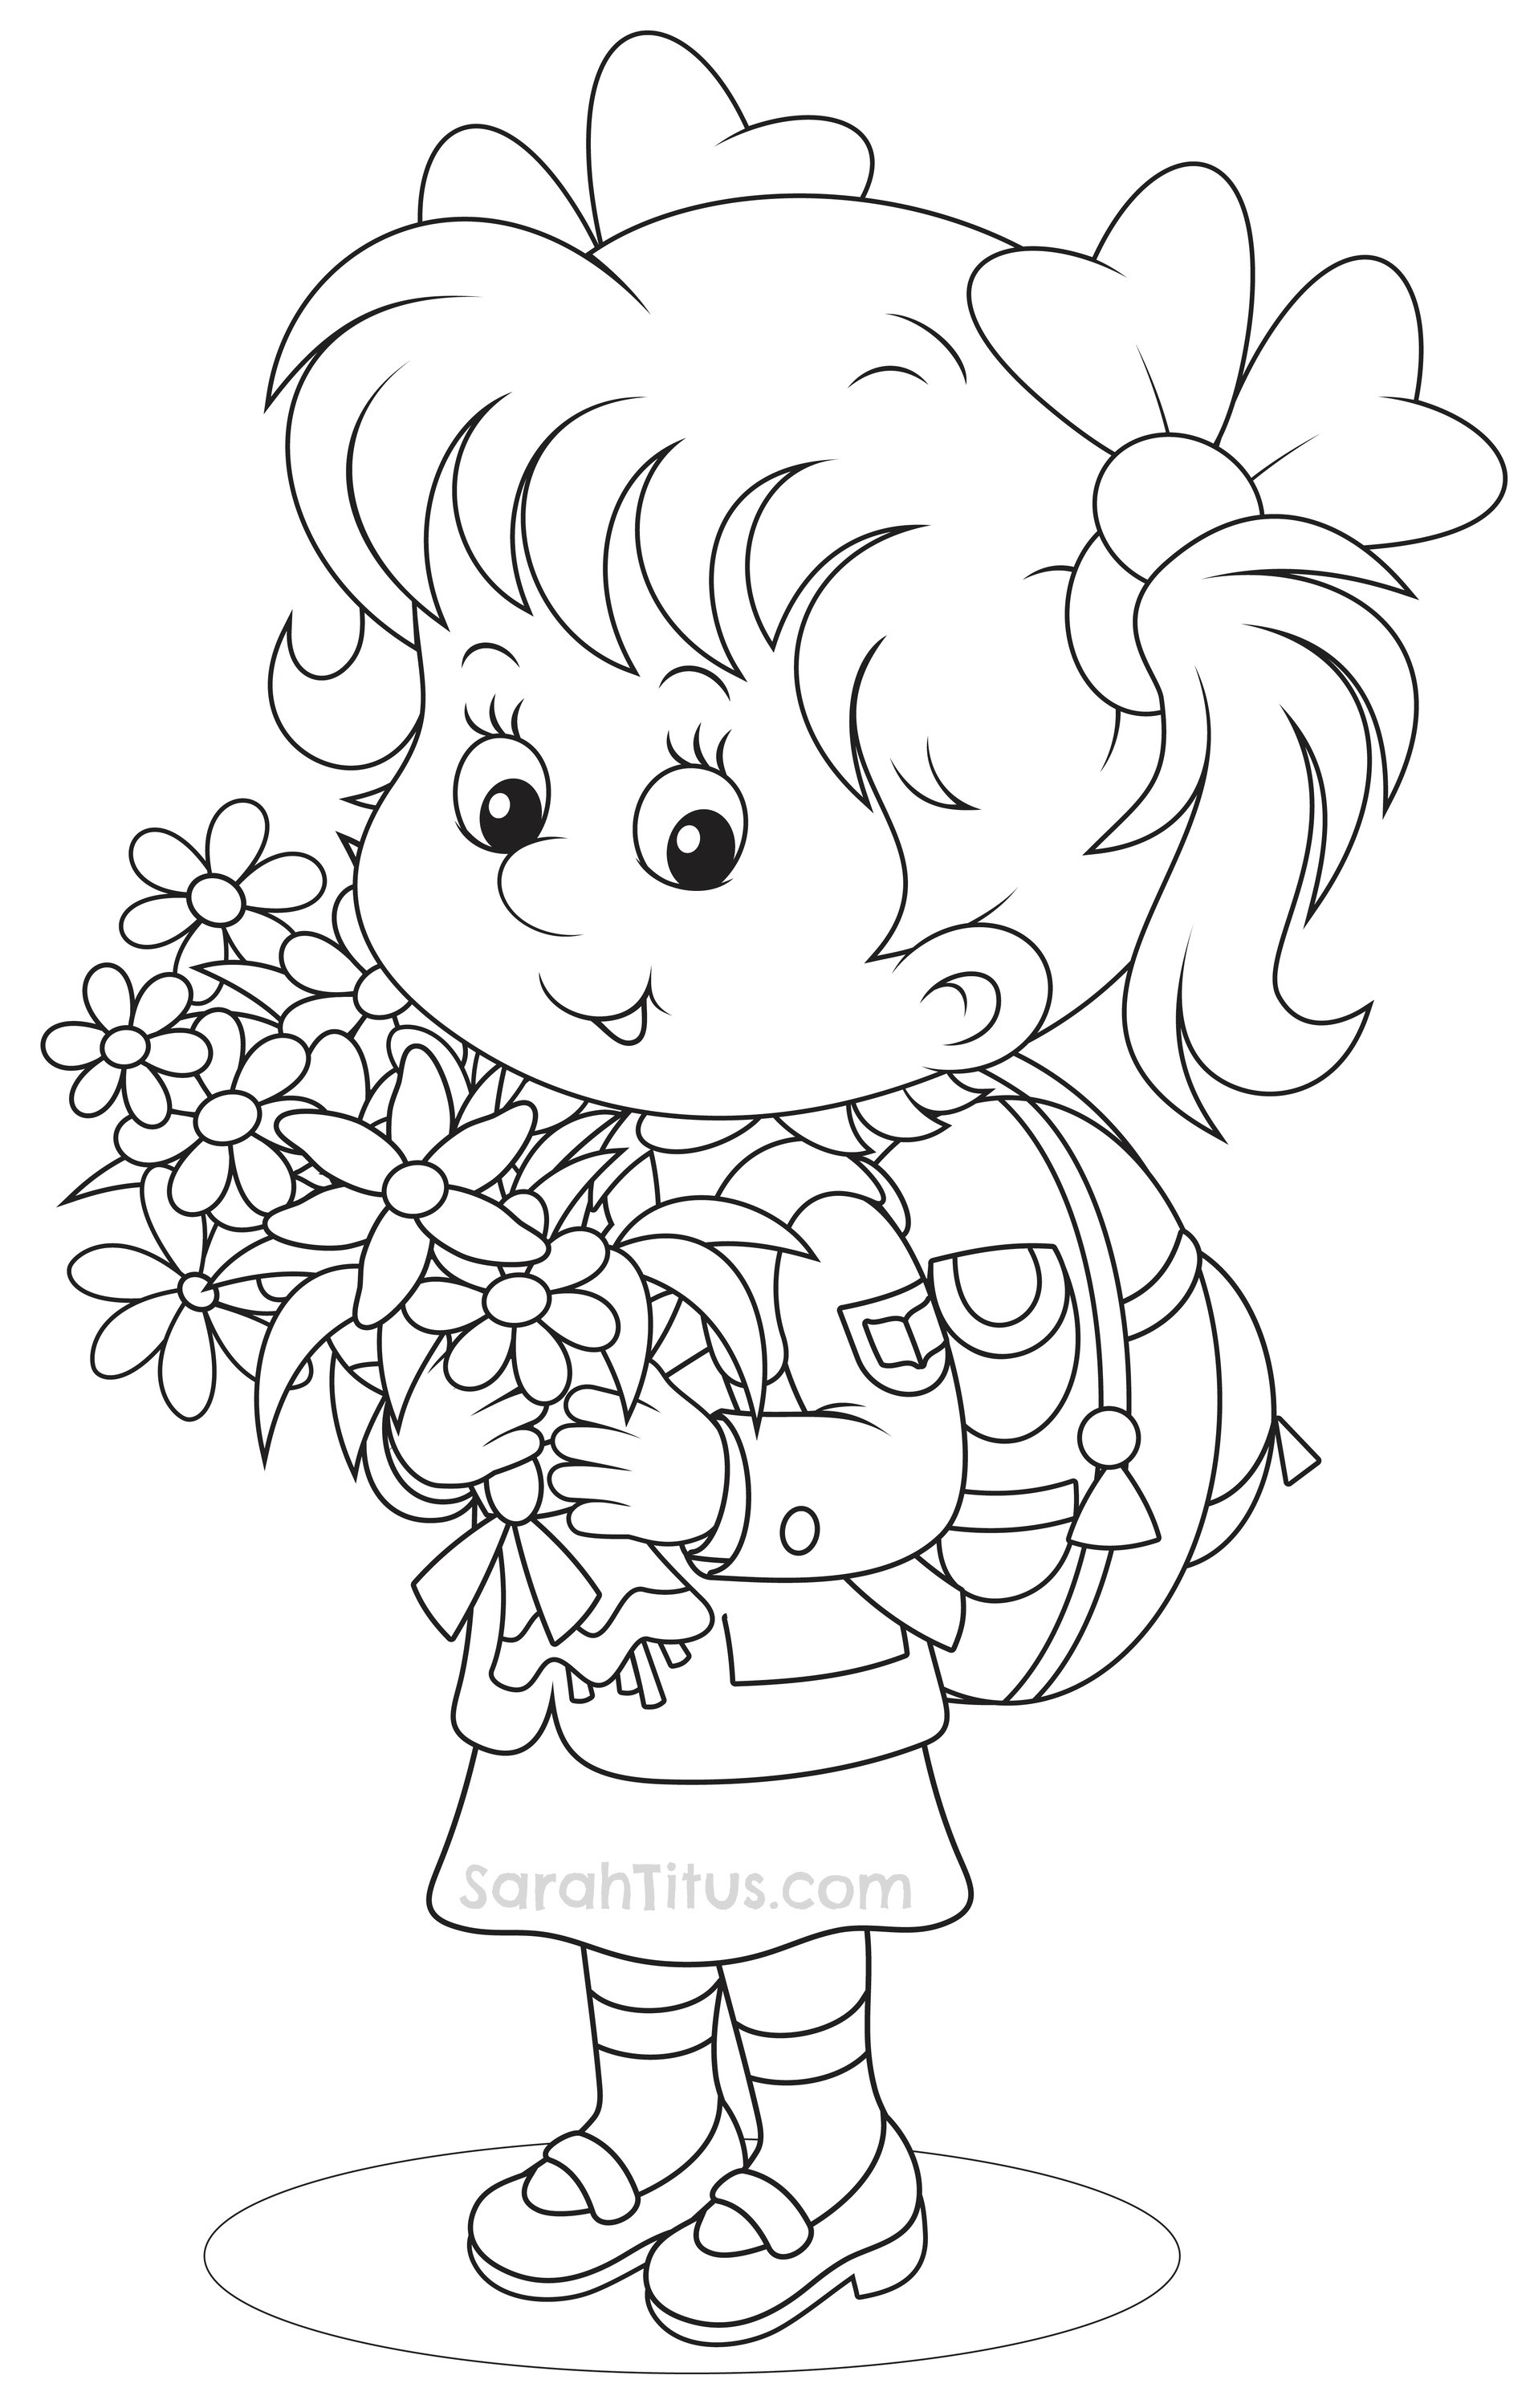 Coloring Sheets For Girls Flower With The Name Laci
 Back to school coloring pages